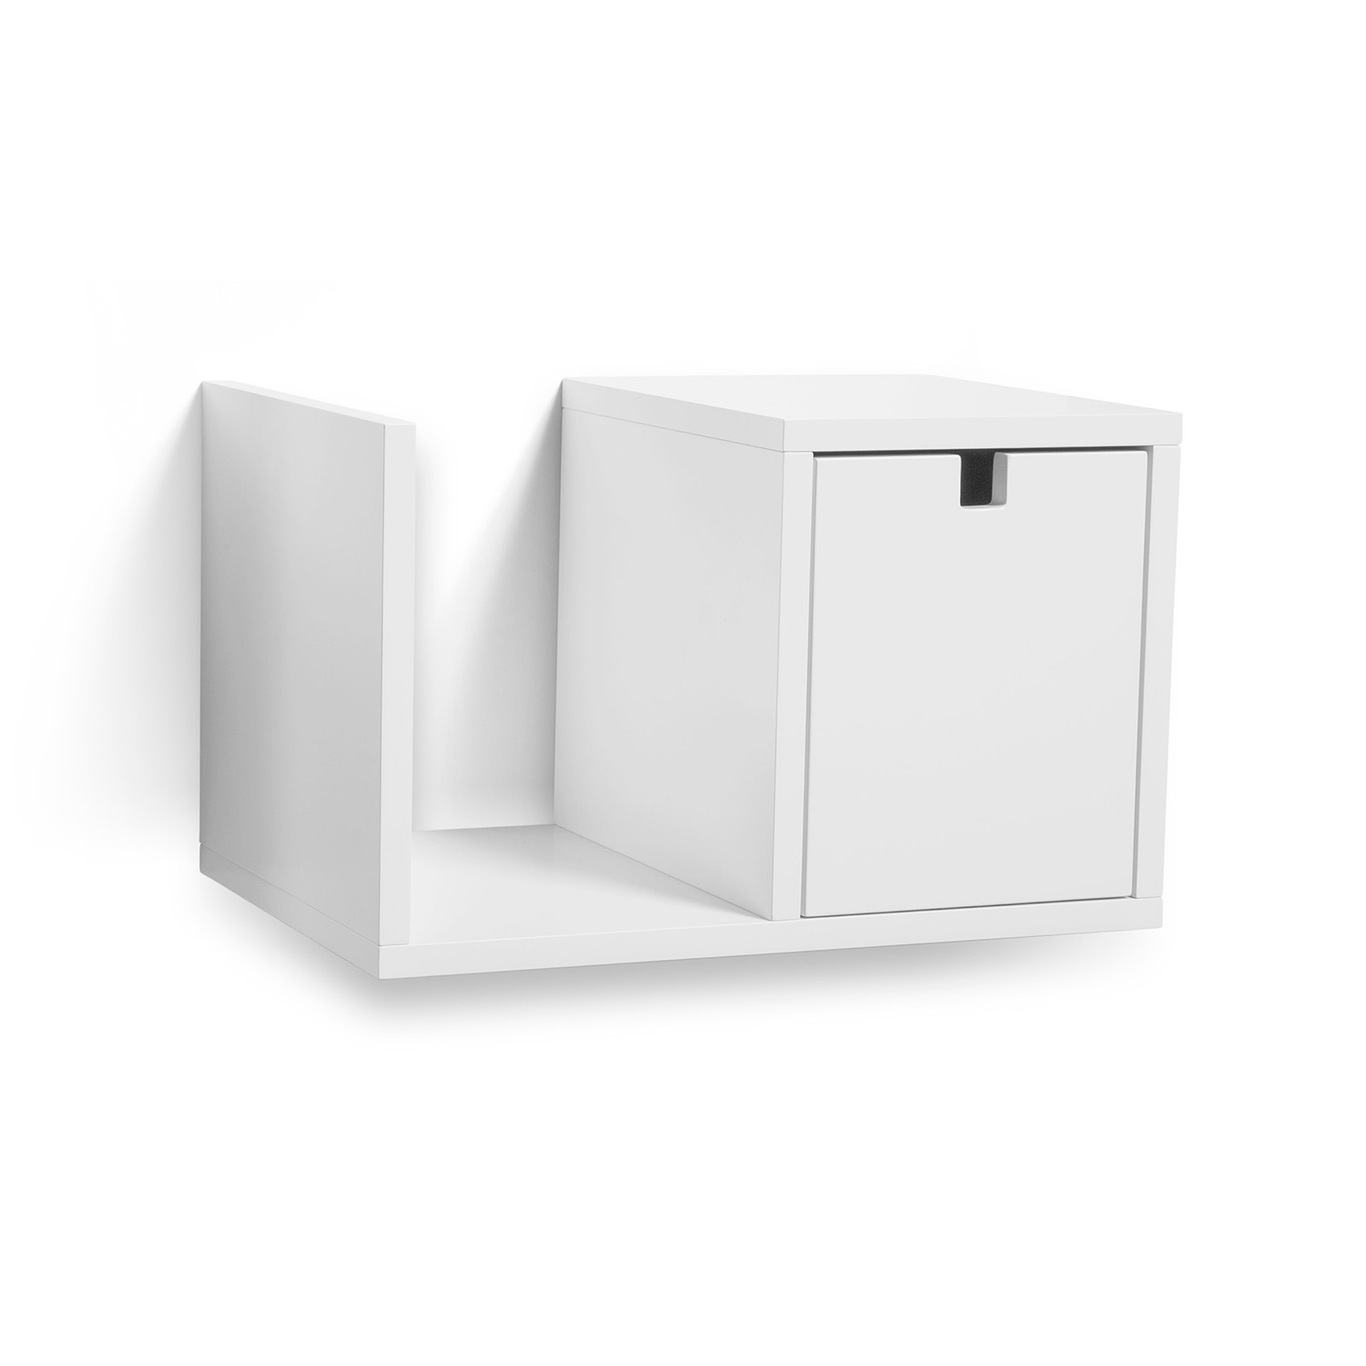 Falsterbo Bedside Table Wall Mounted, White Lacquer